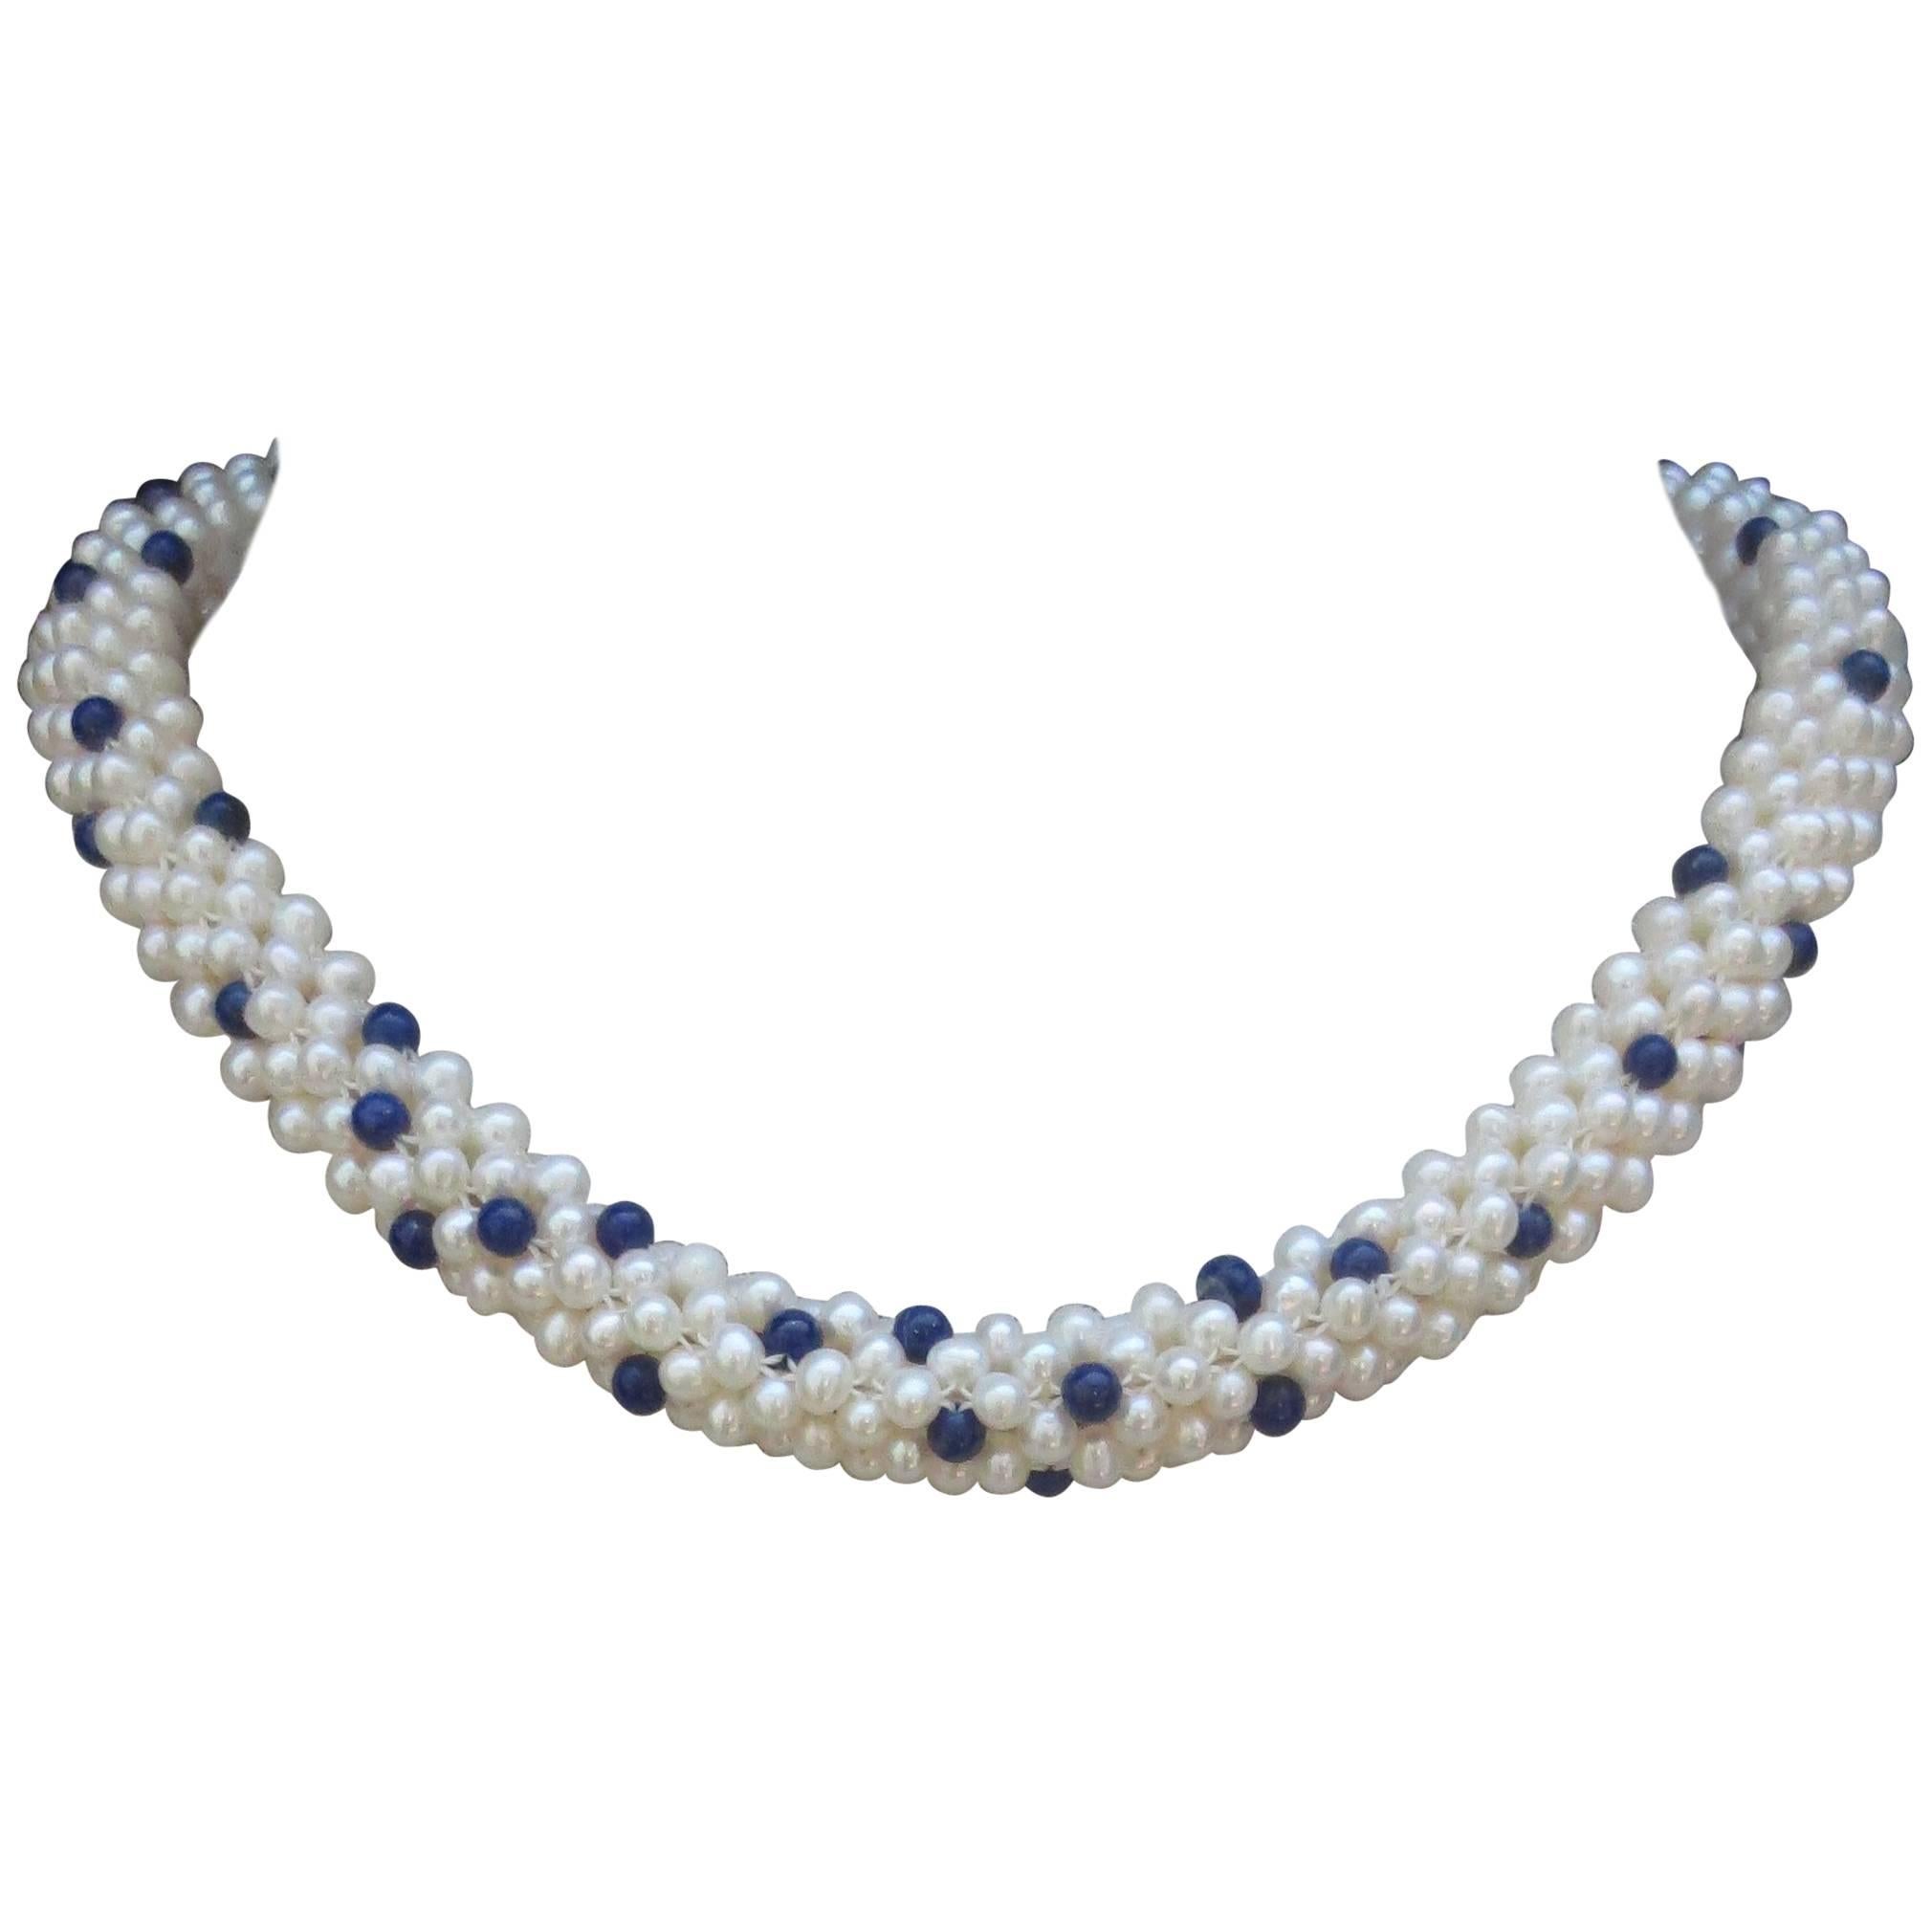 Lapis Lazuli and White Pearl Woven Rope Necklace with 14 k Yellow Gold Clasp